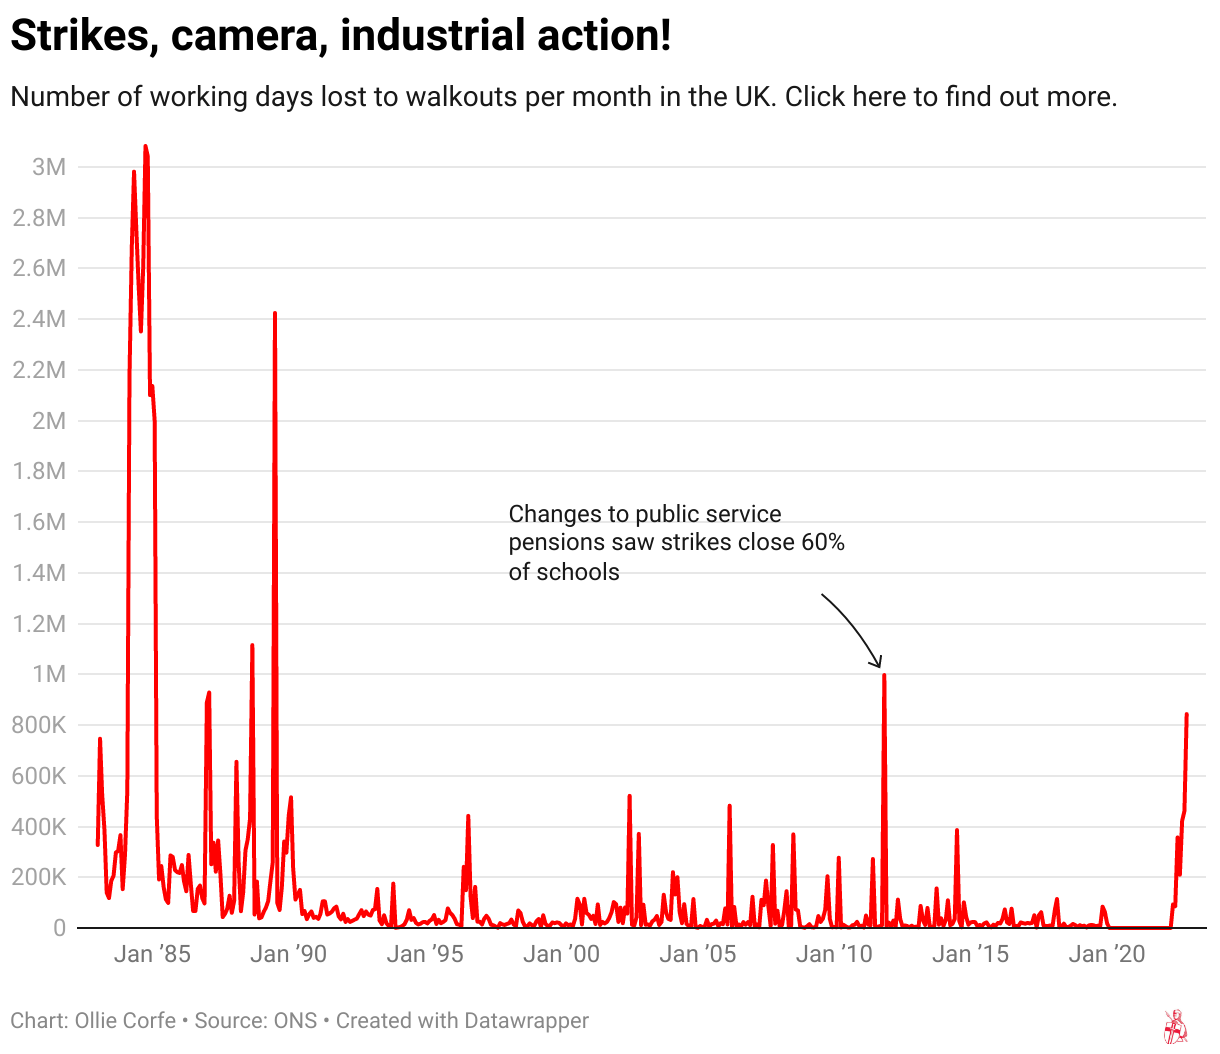 Chart displaying the number of working days lost in the UK to strikes.